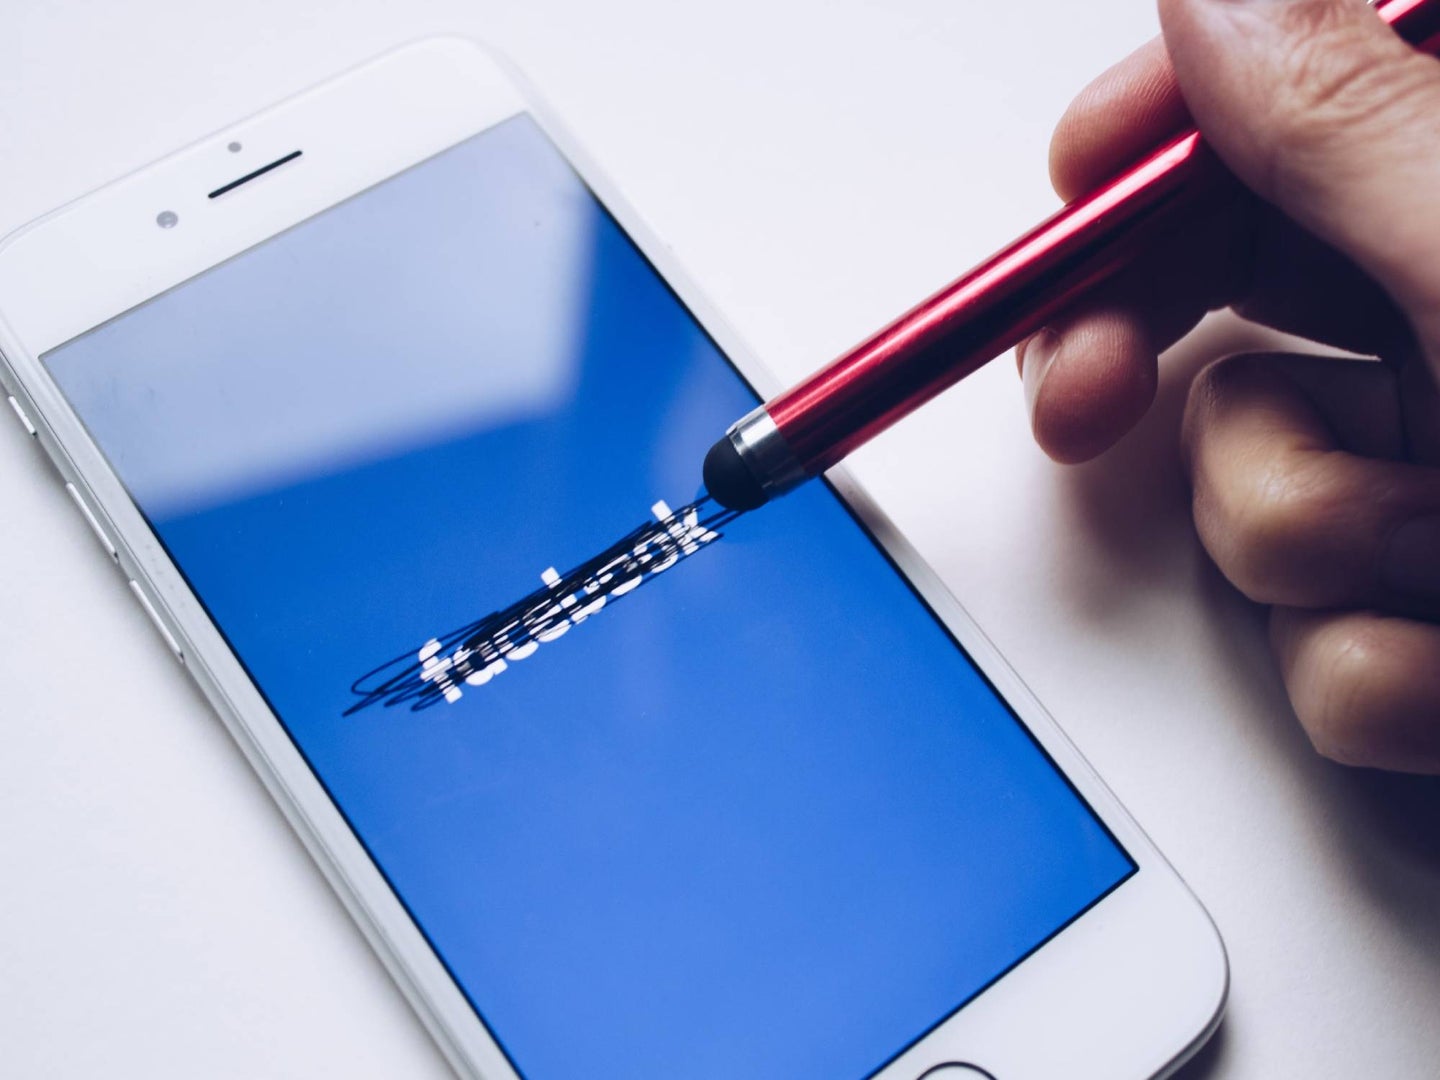 A person using a stylus to cross out the Facebook logo on an iPhone screen.